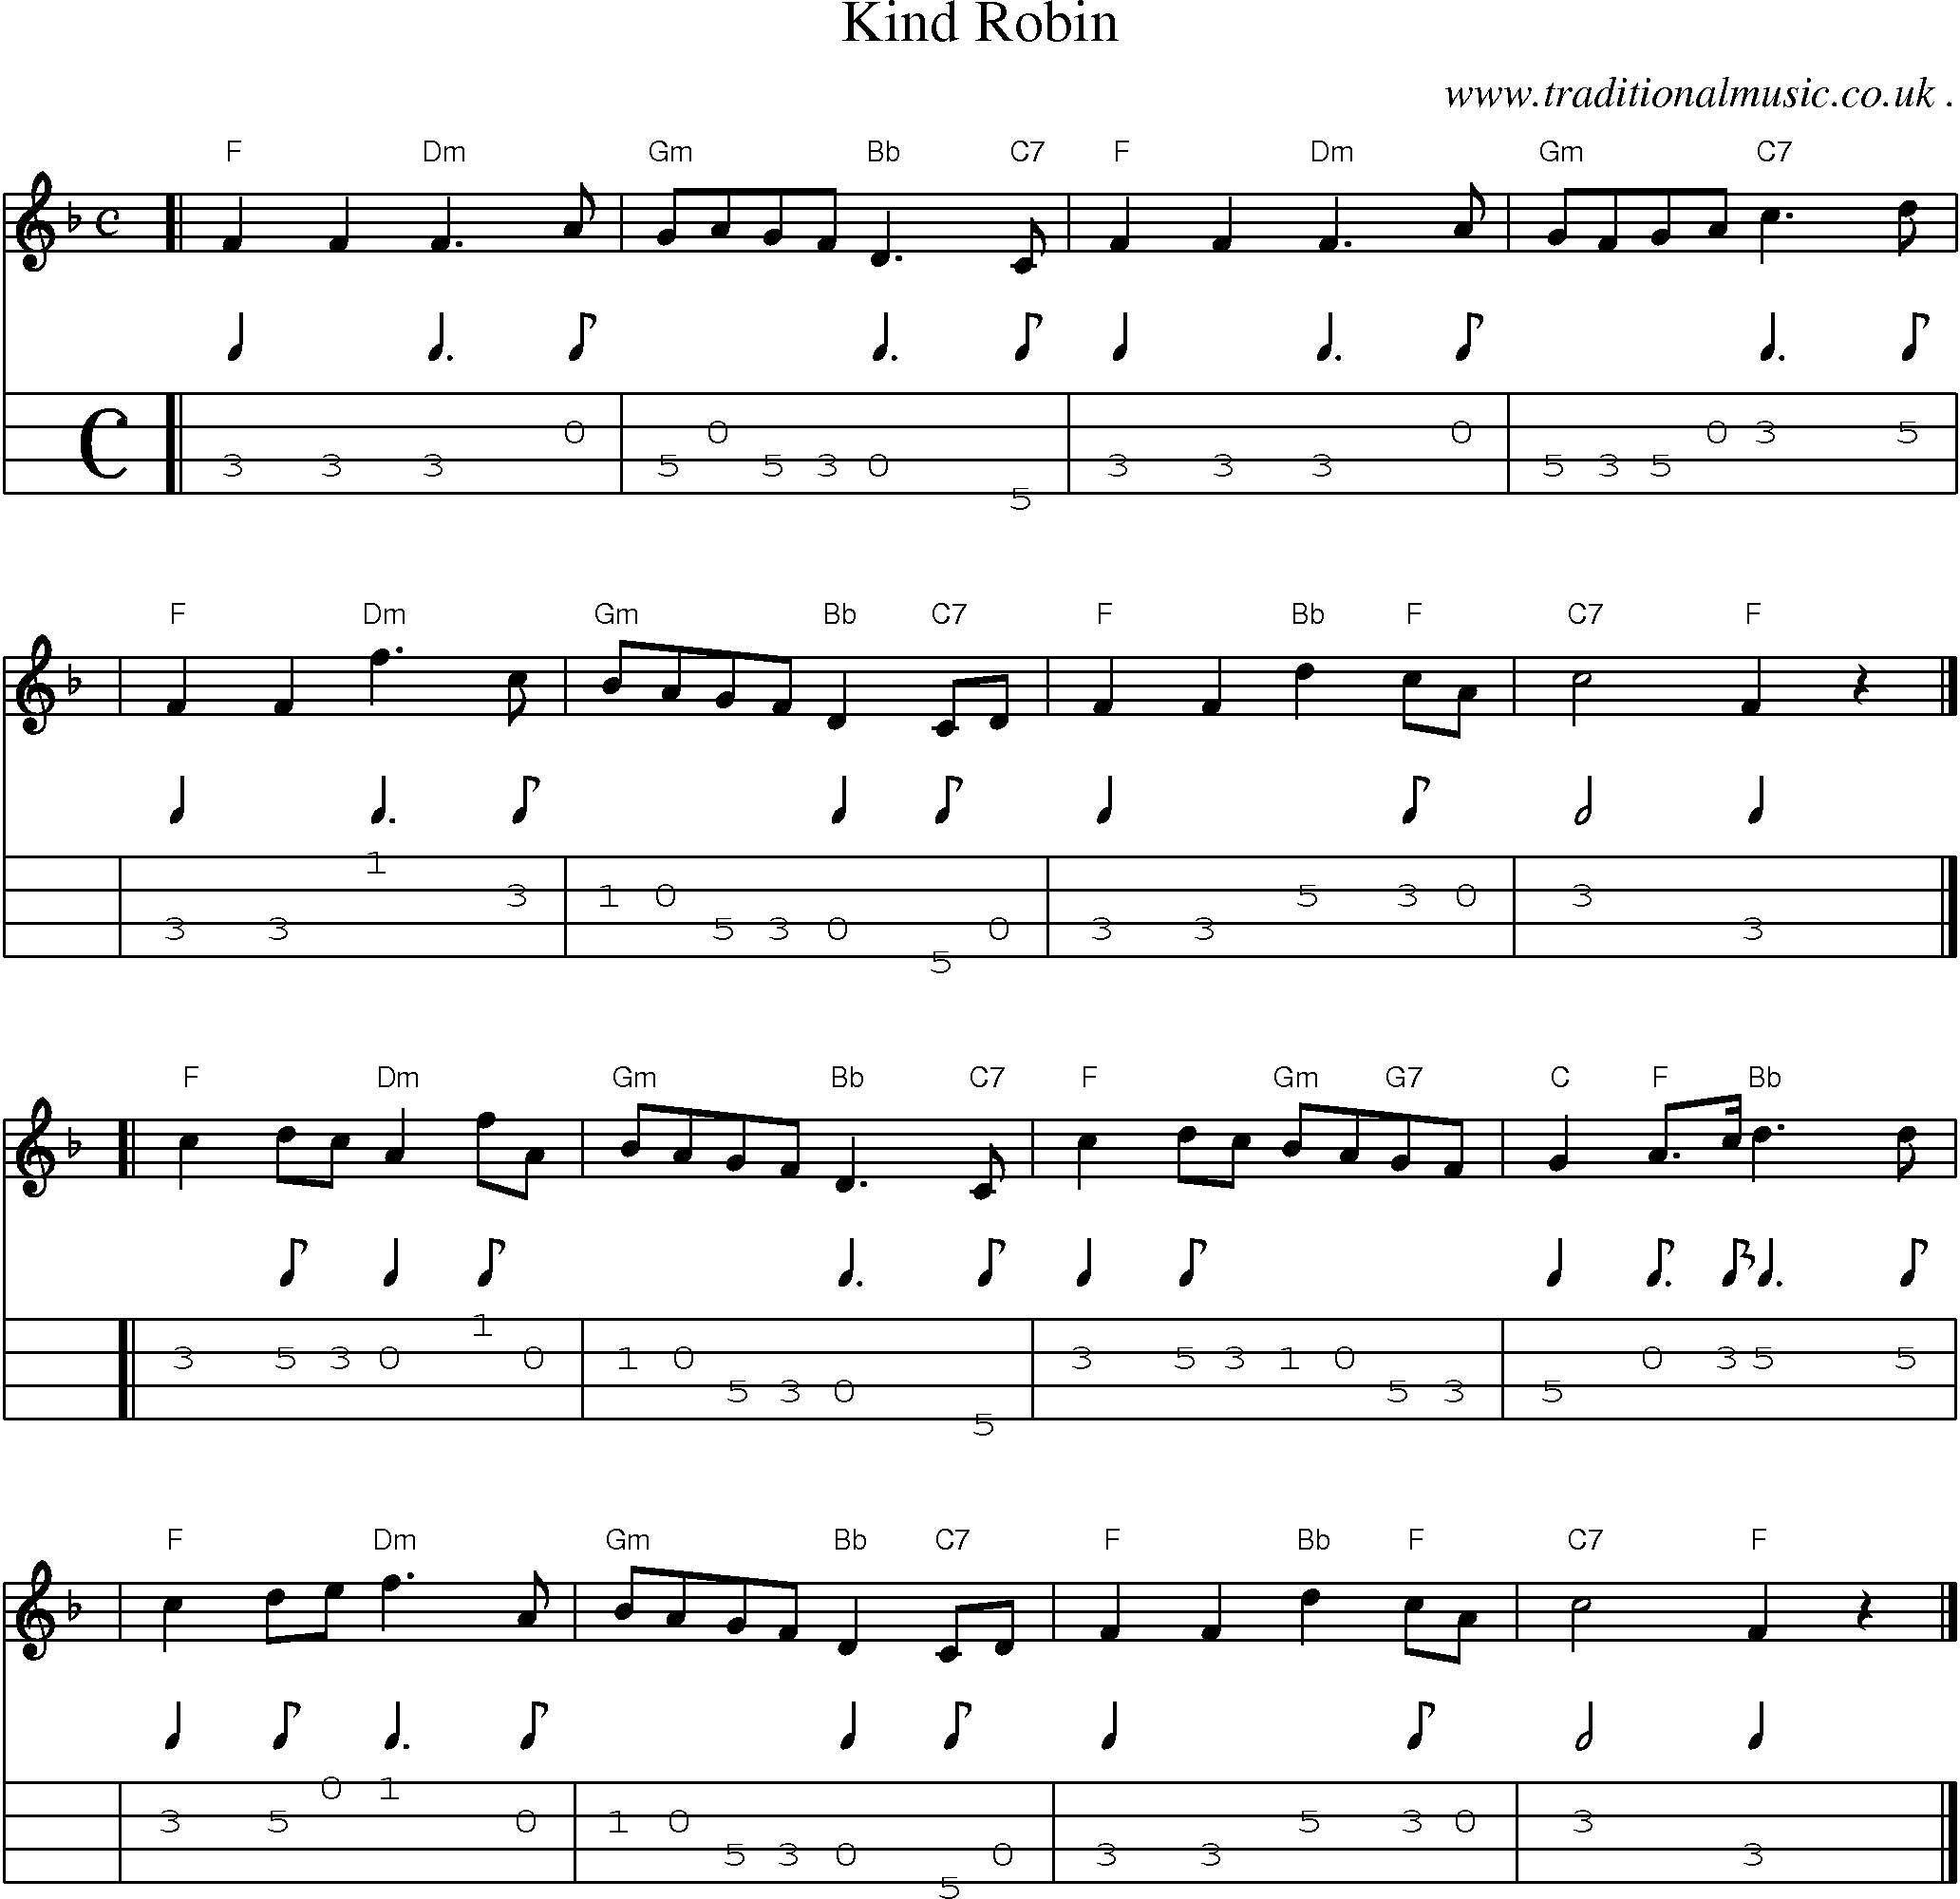 Sheet-music  score, Chords and Mandolin Tabs for Kind Robin